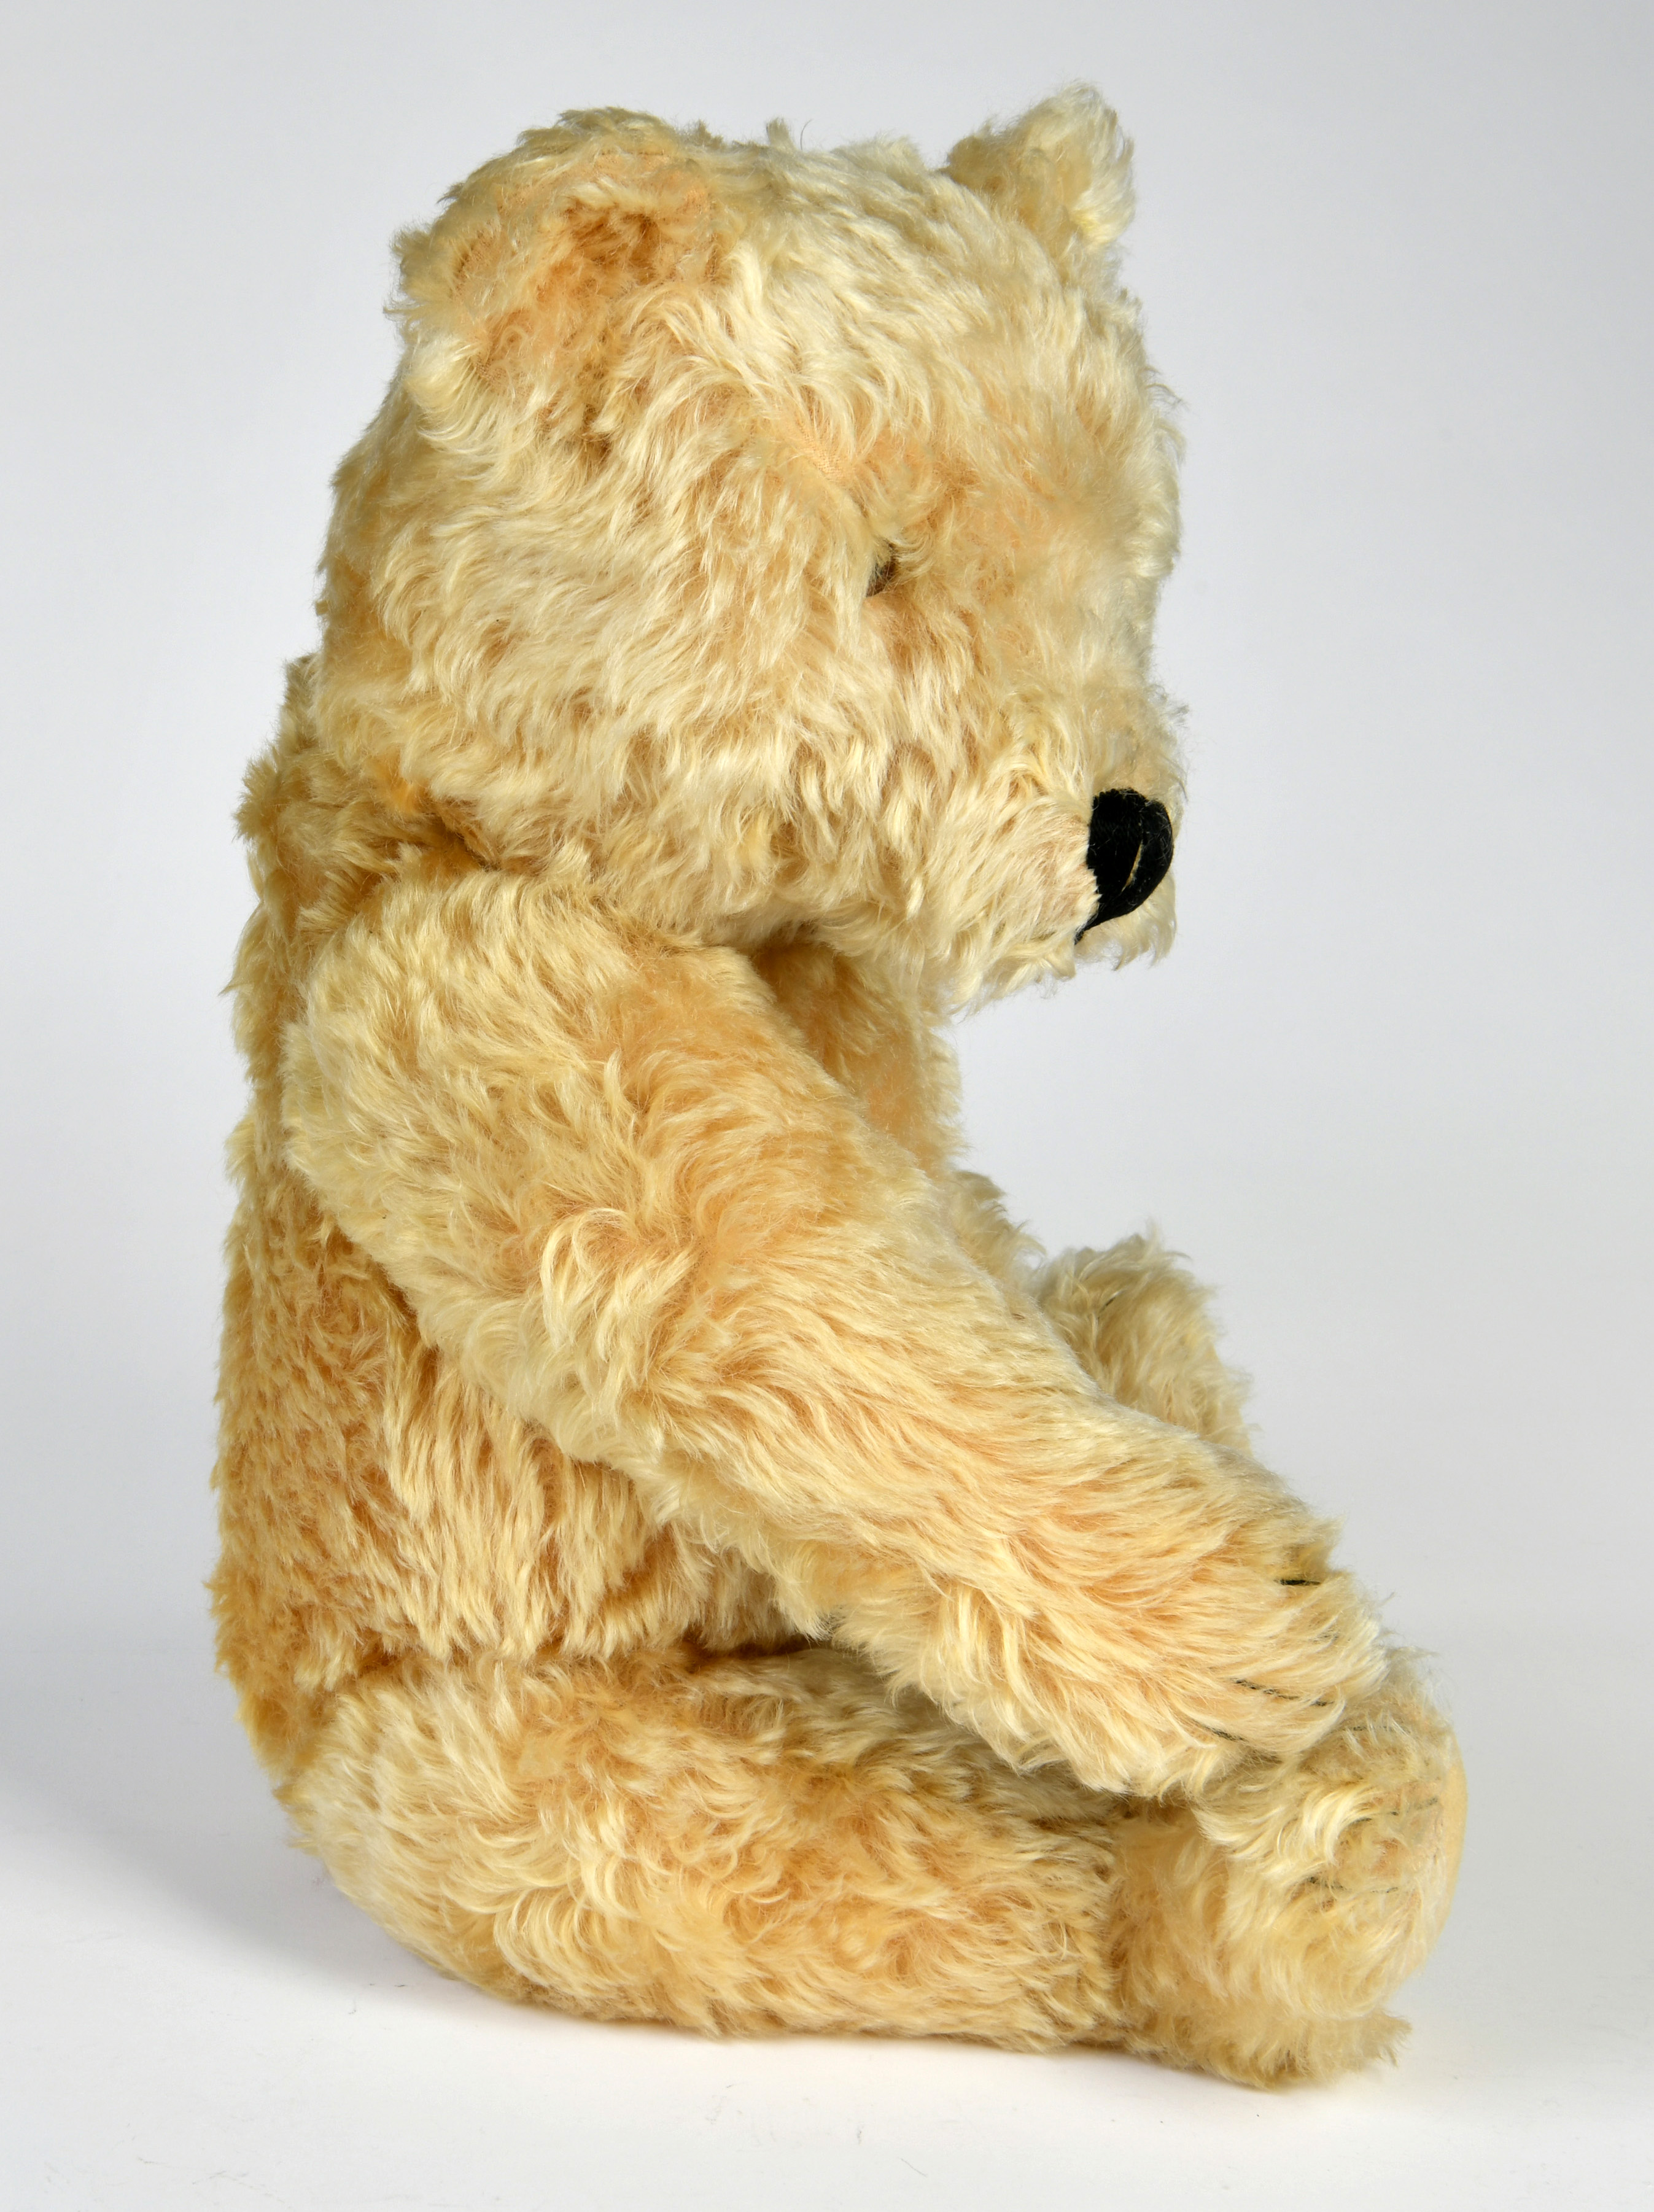 Steiff, bear, 60cm, 1950s/1960s, with buttom, yellow, very good condition - Image 2 of 2